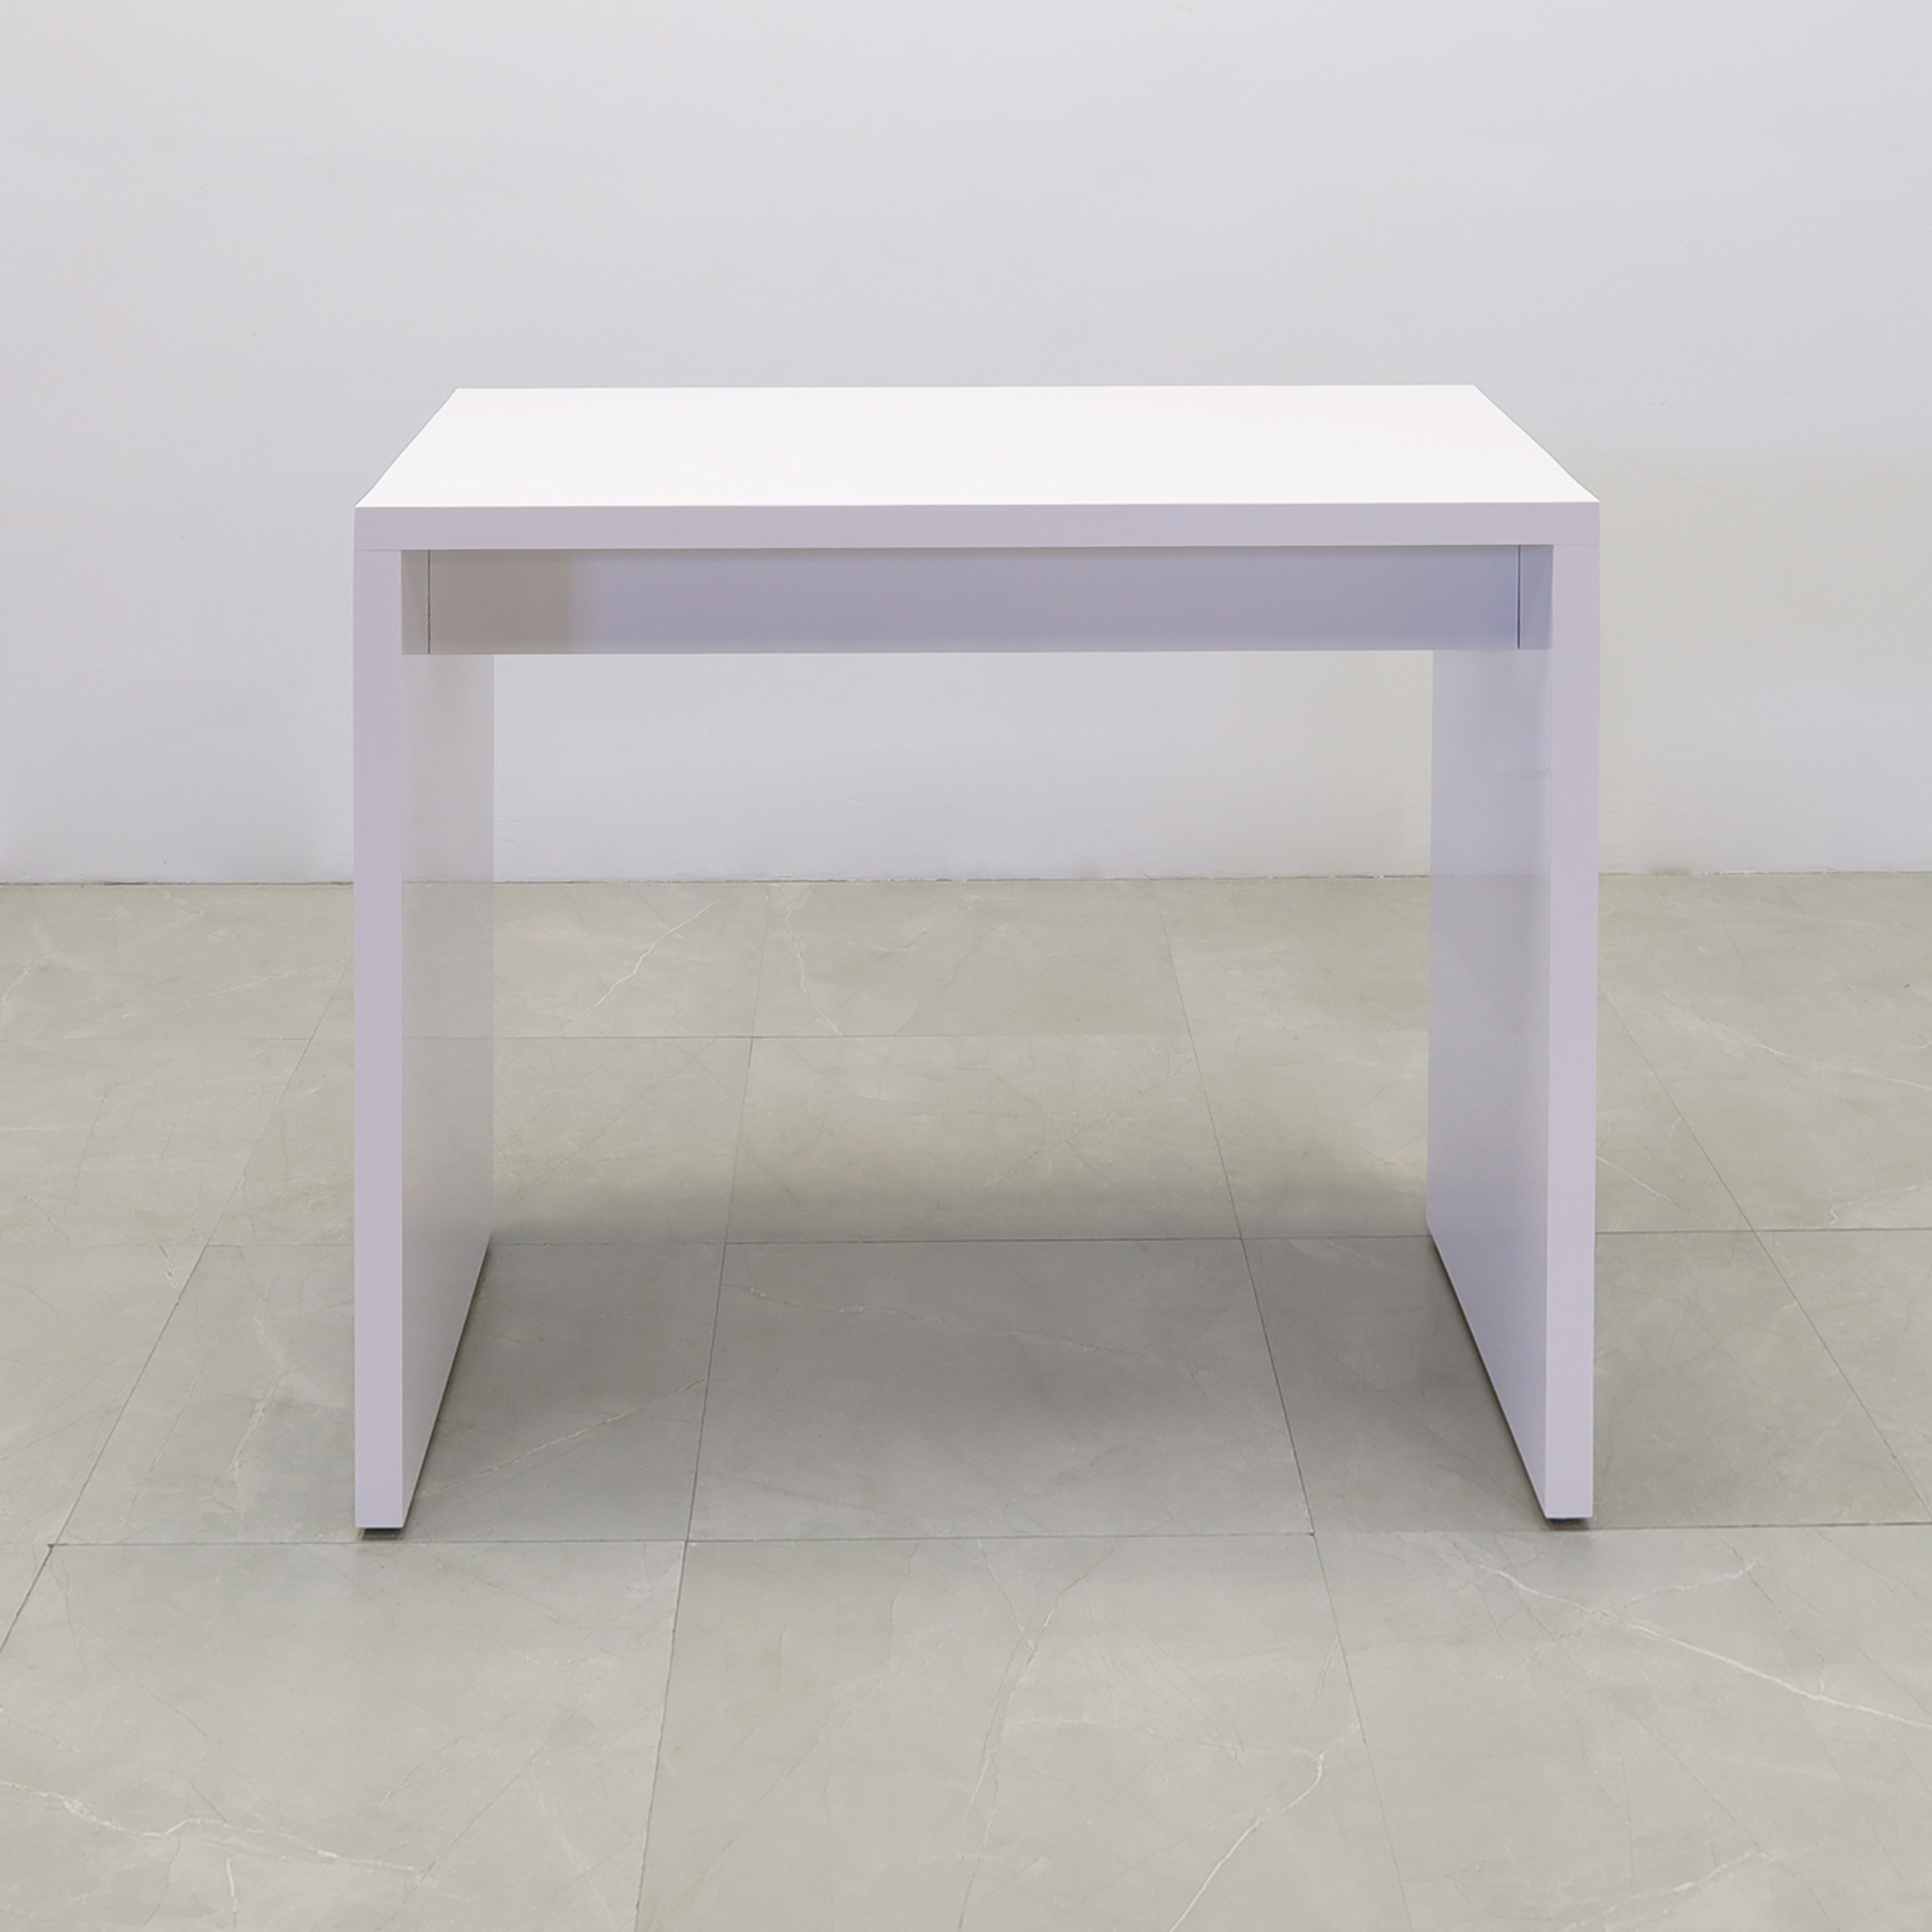 46 inches Ashville Bar Table in White Gloss Laminate shown here.